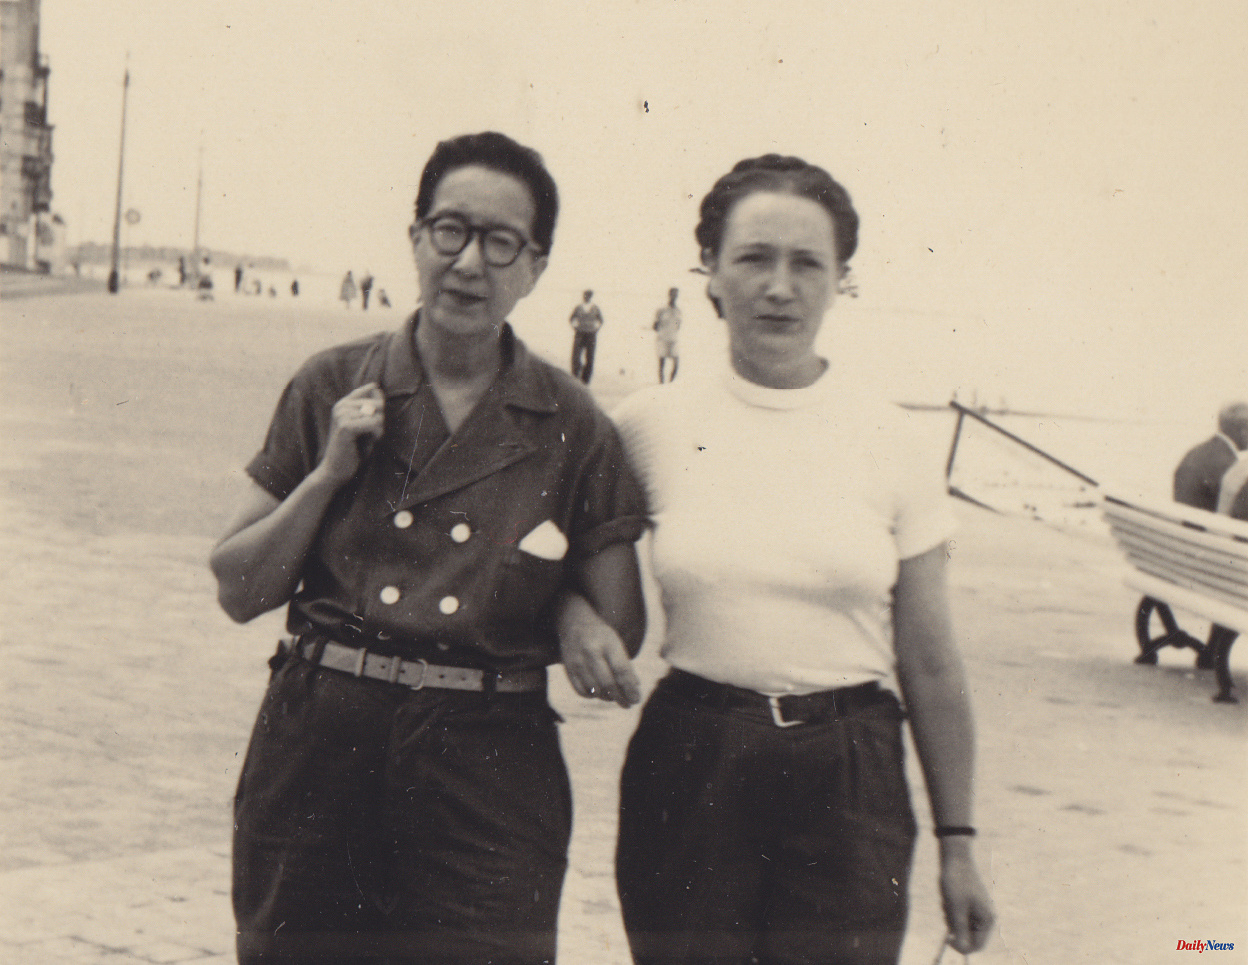 Documentary The lesbian love story that blossomed in a German concentration camp during World War II